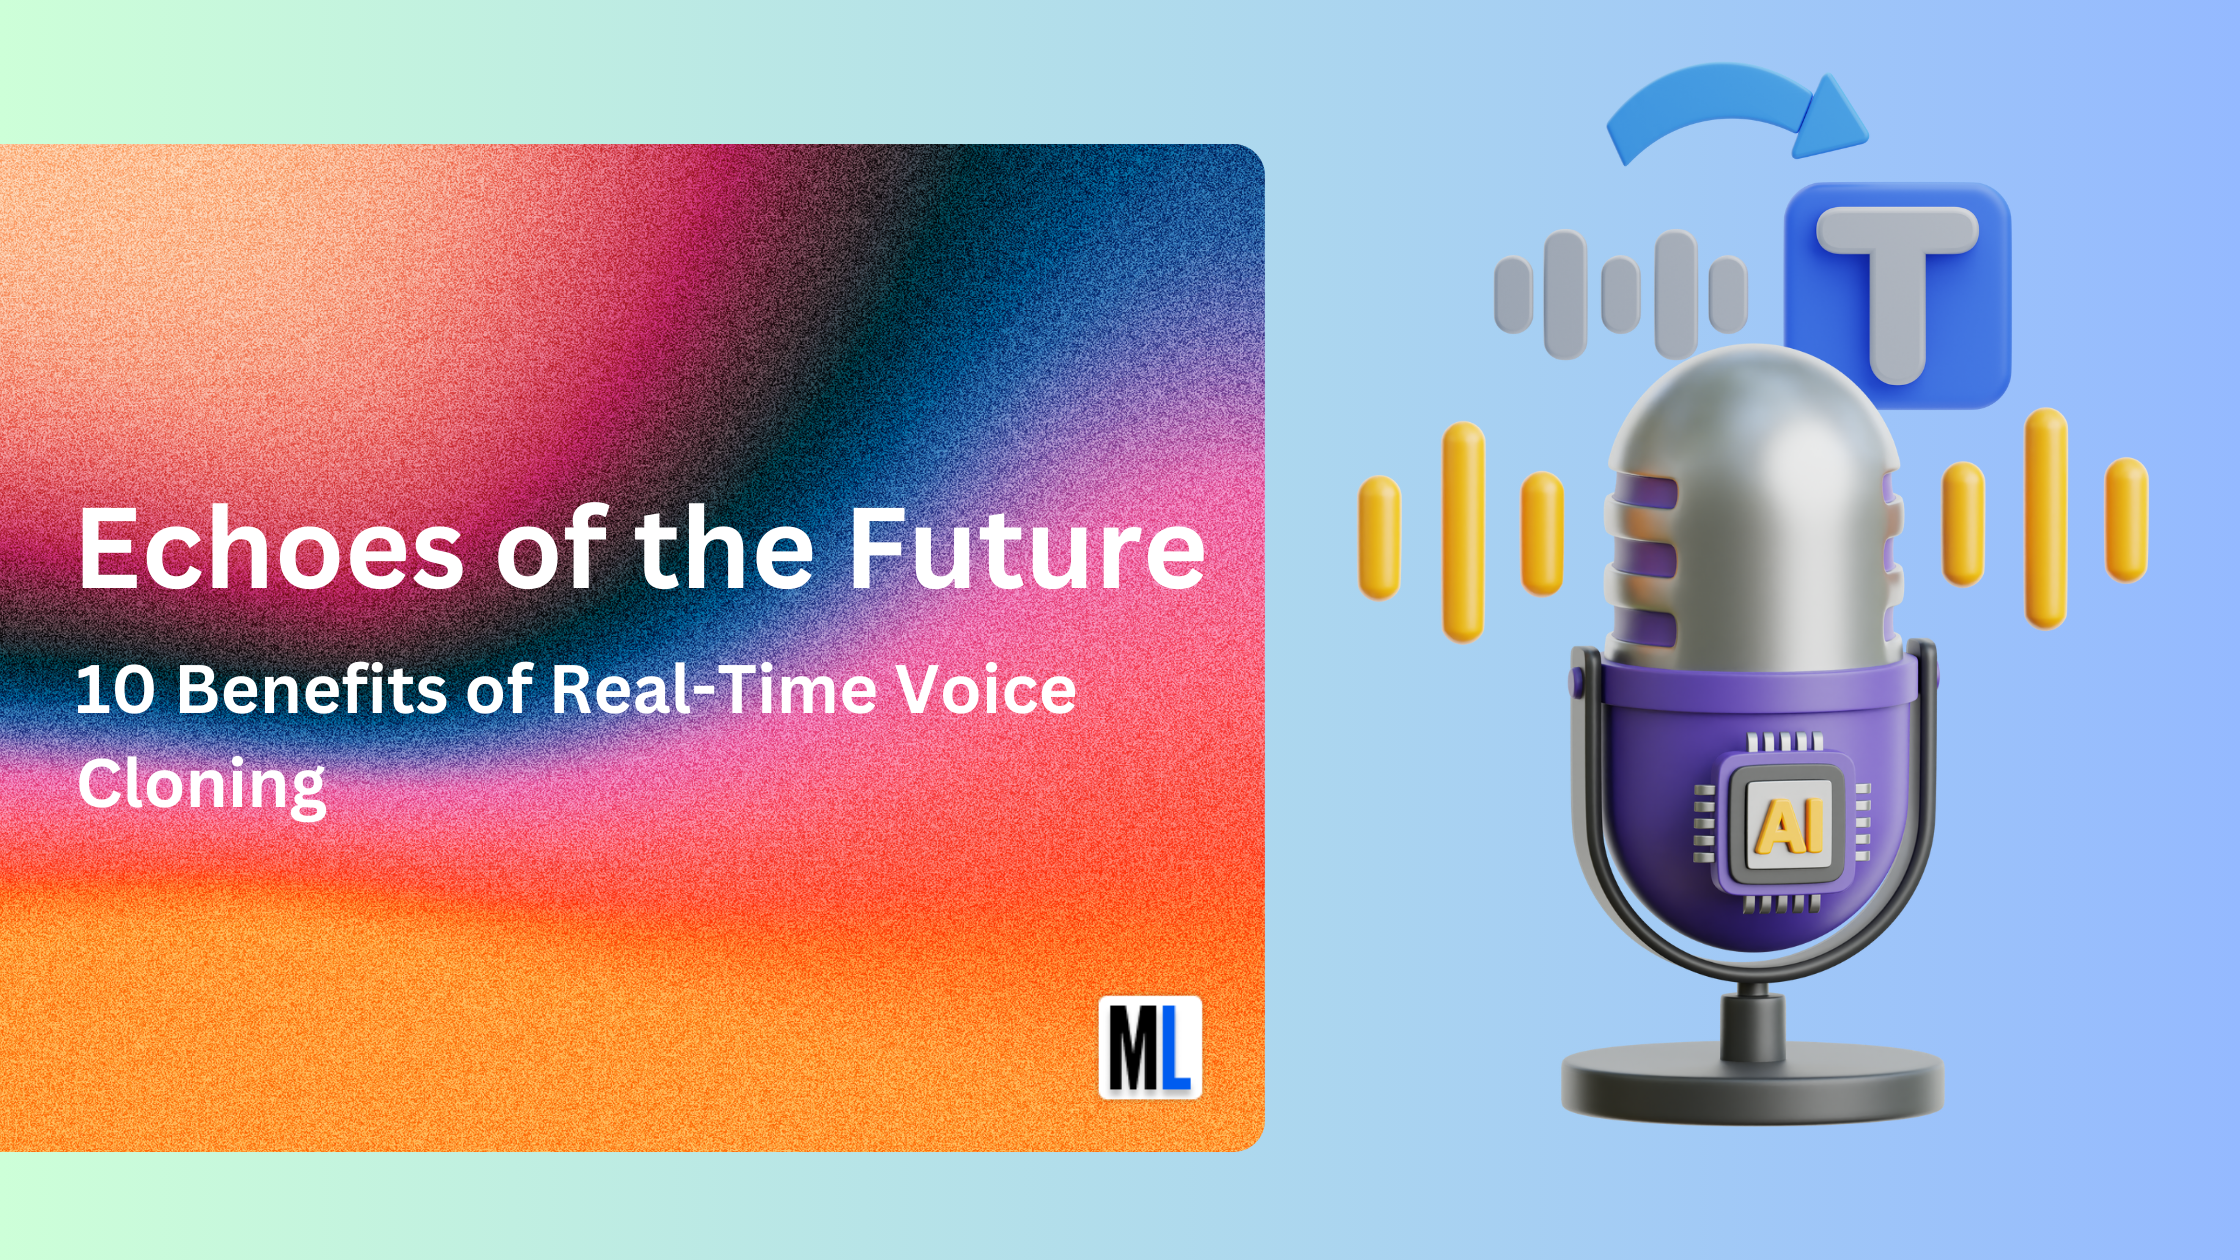 Echoes of the Future: 10 Benefits of Real-Time Voice Cloning